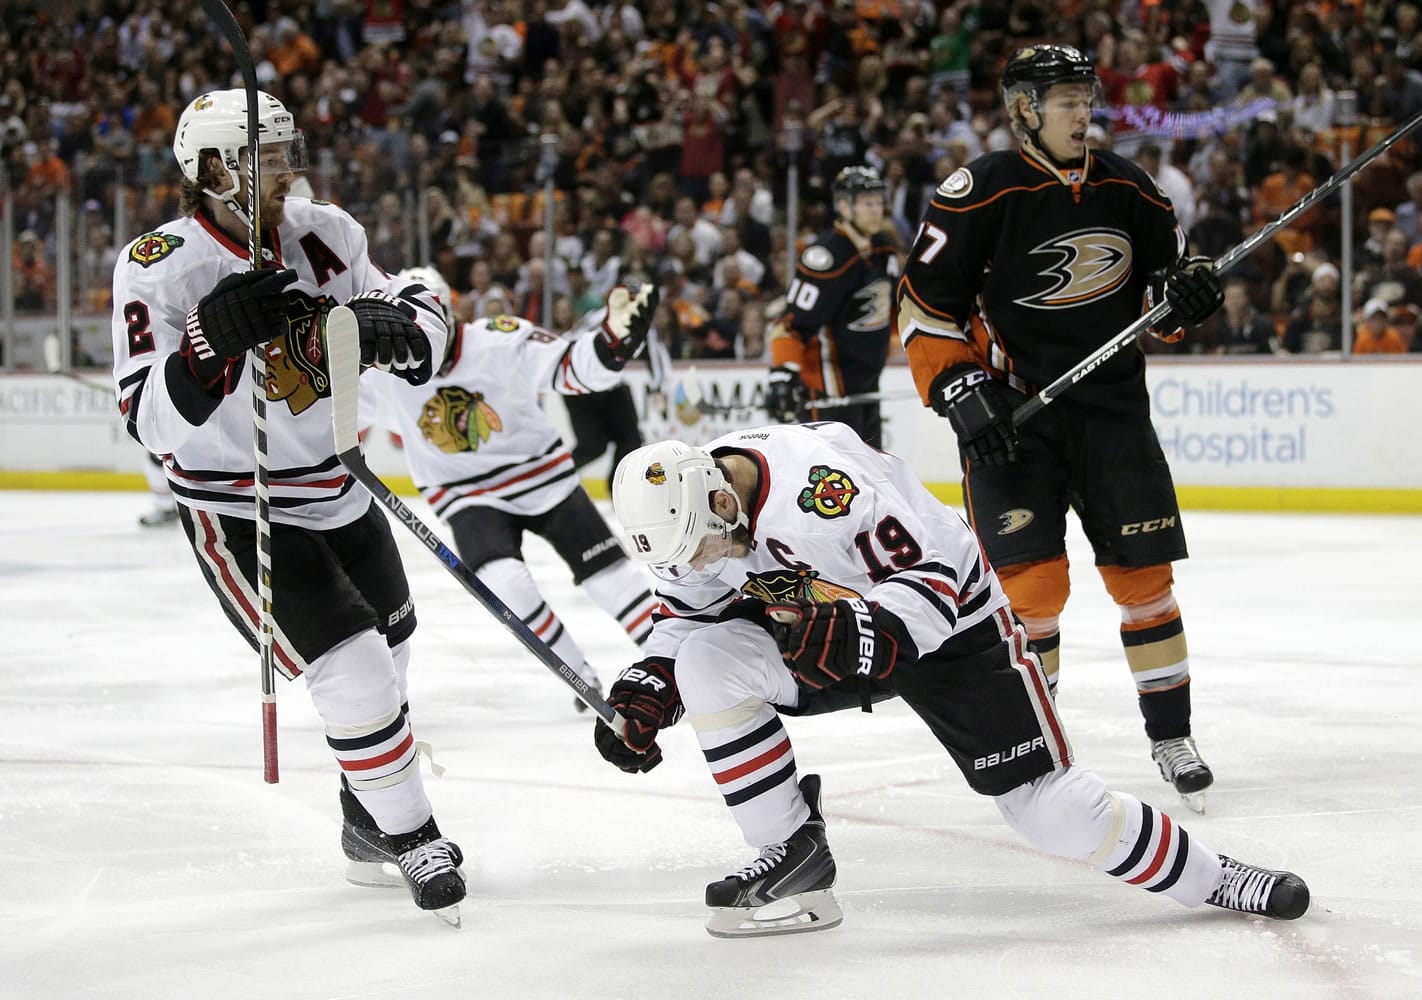 Chicago's Jonathan Toews (19) reacts after scoring a goal against the Anaheim Ducks during the first period of Game 7 on Saturday.